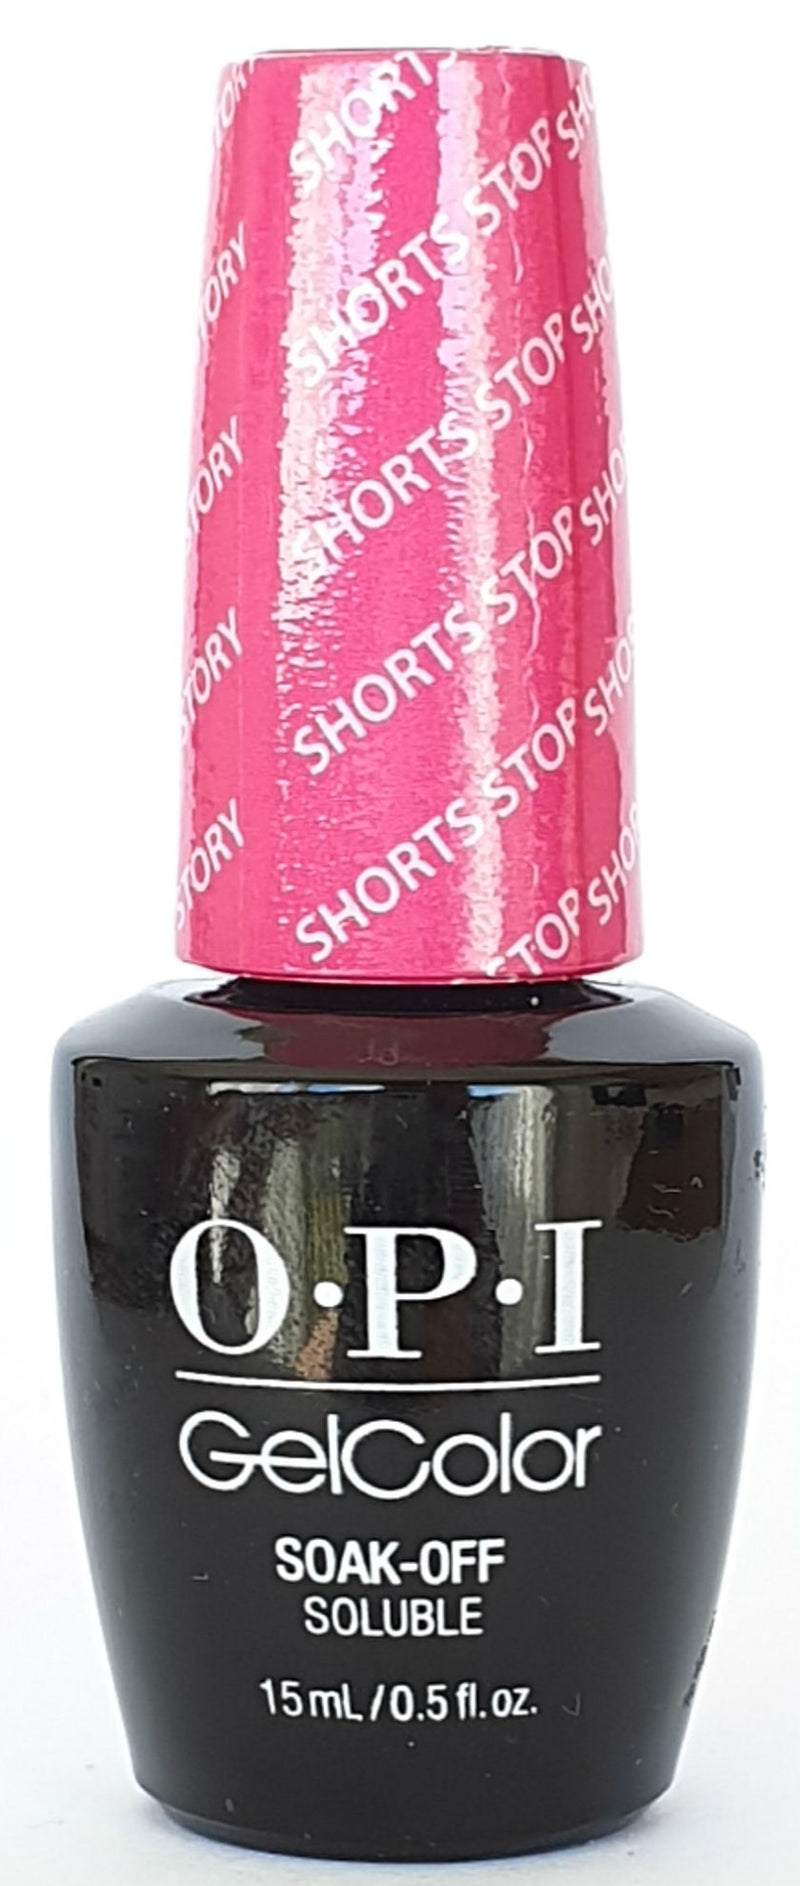 Shorts Story (Brights) * OPI Gelcolor